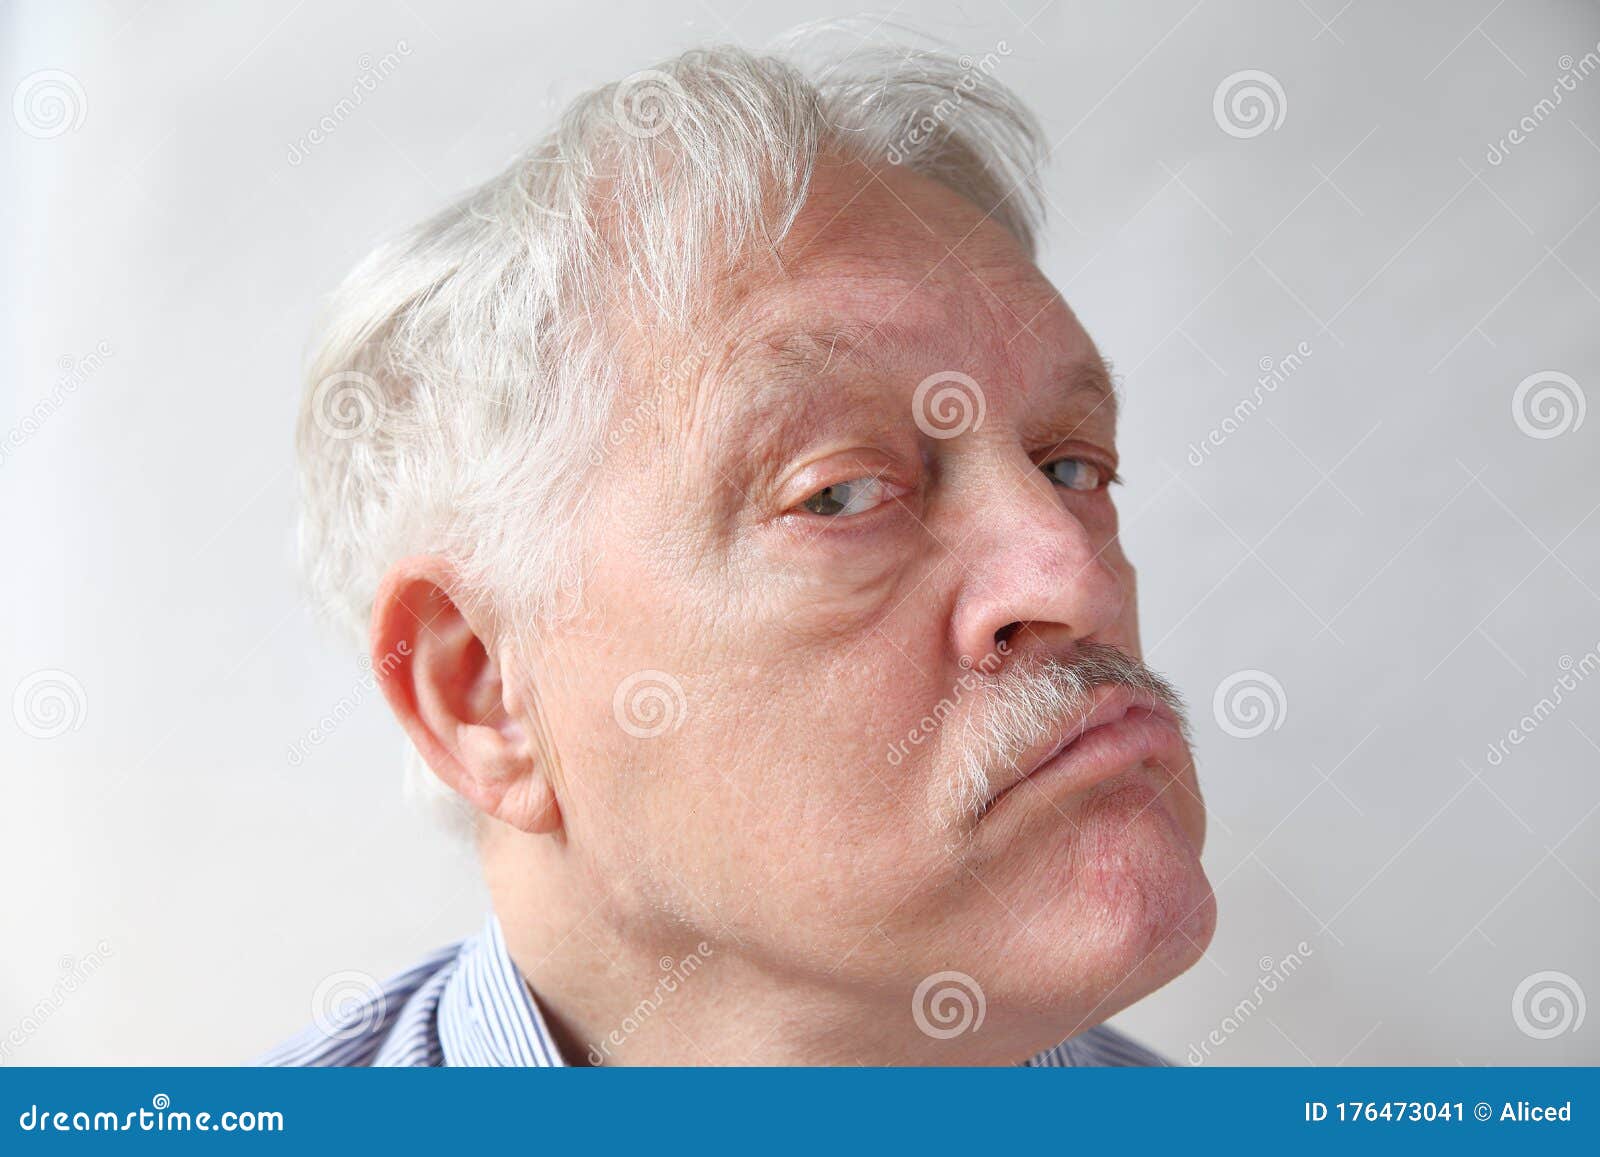 Senior Man with Doubting Expression Stock Image - Image of room ...